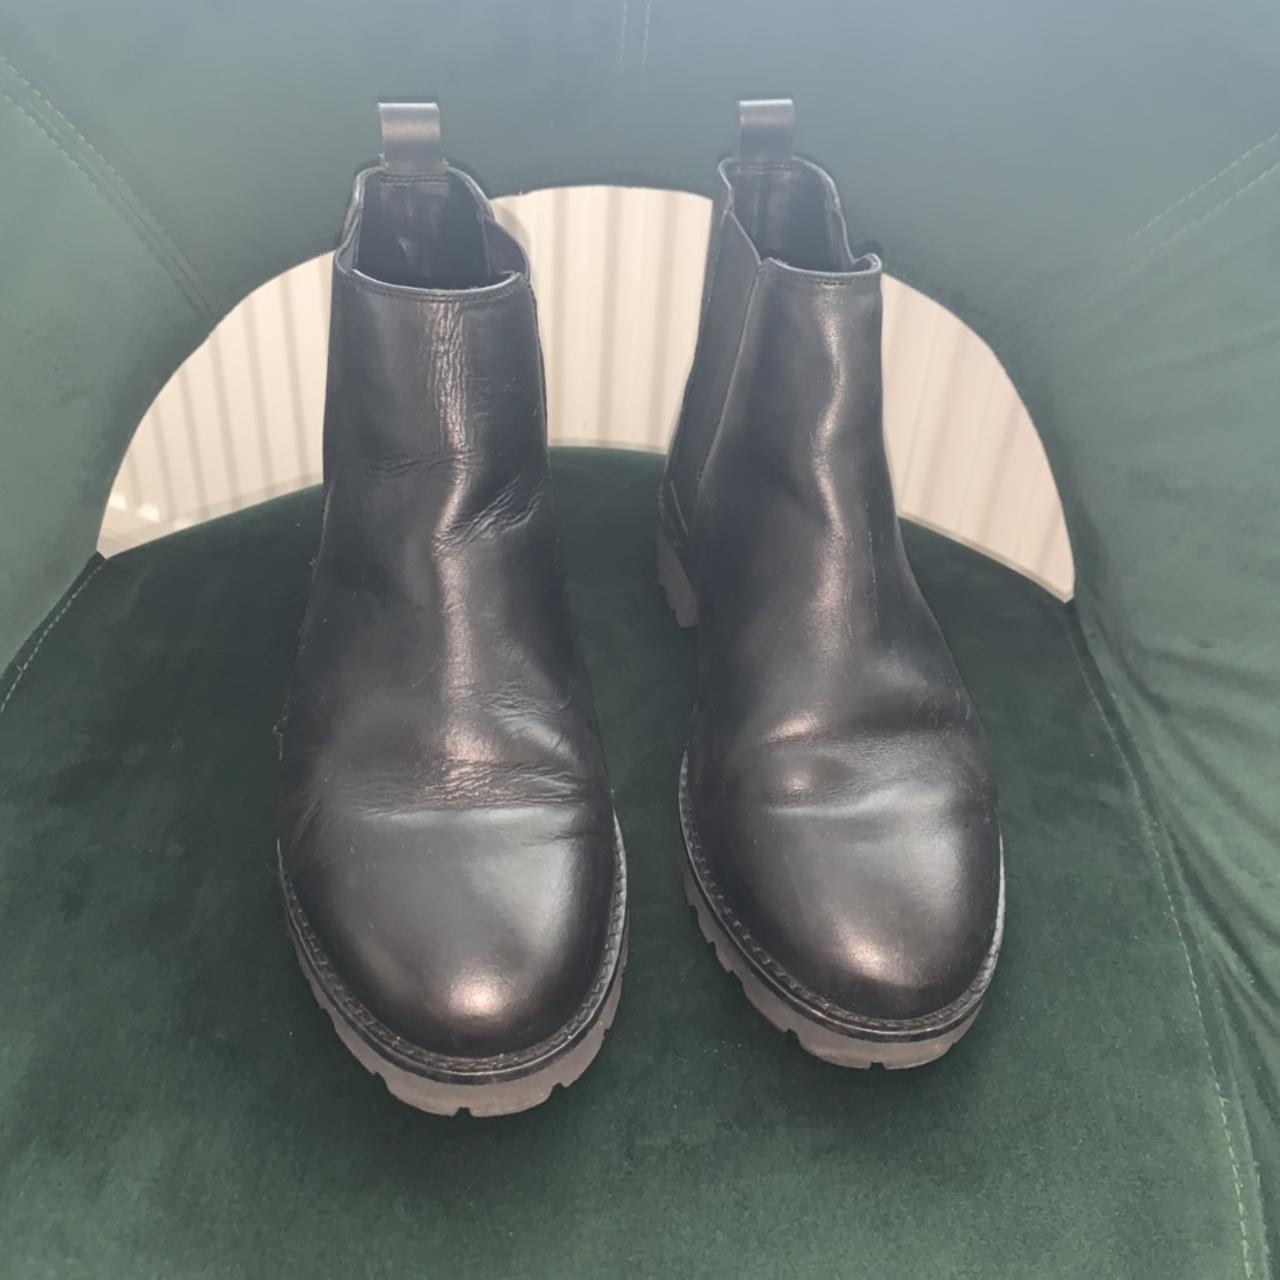 ASOS leather Chelsea boots Worn twice Size 4 Policy... - Depop